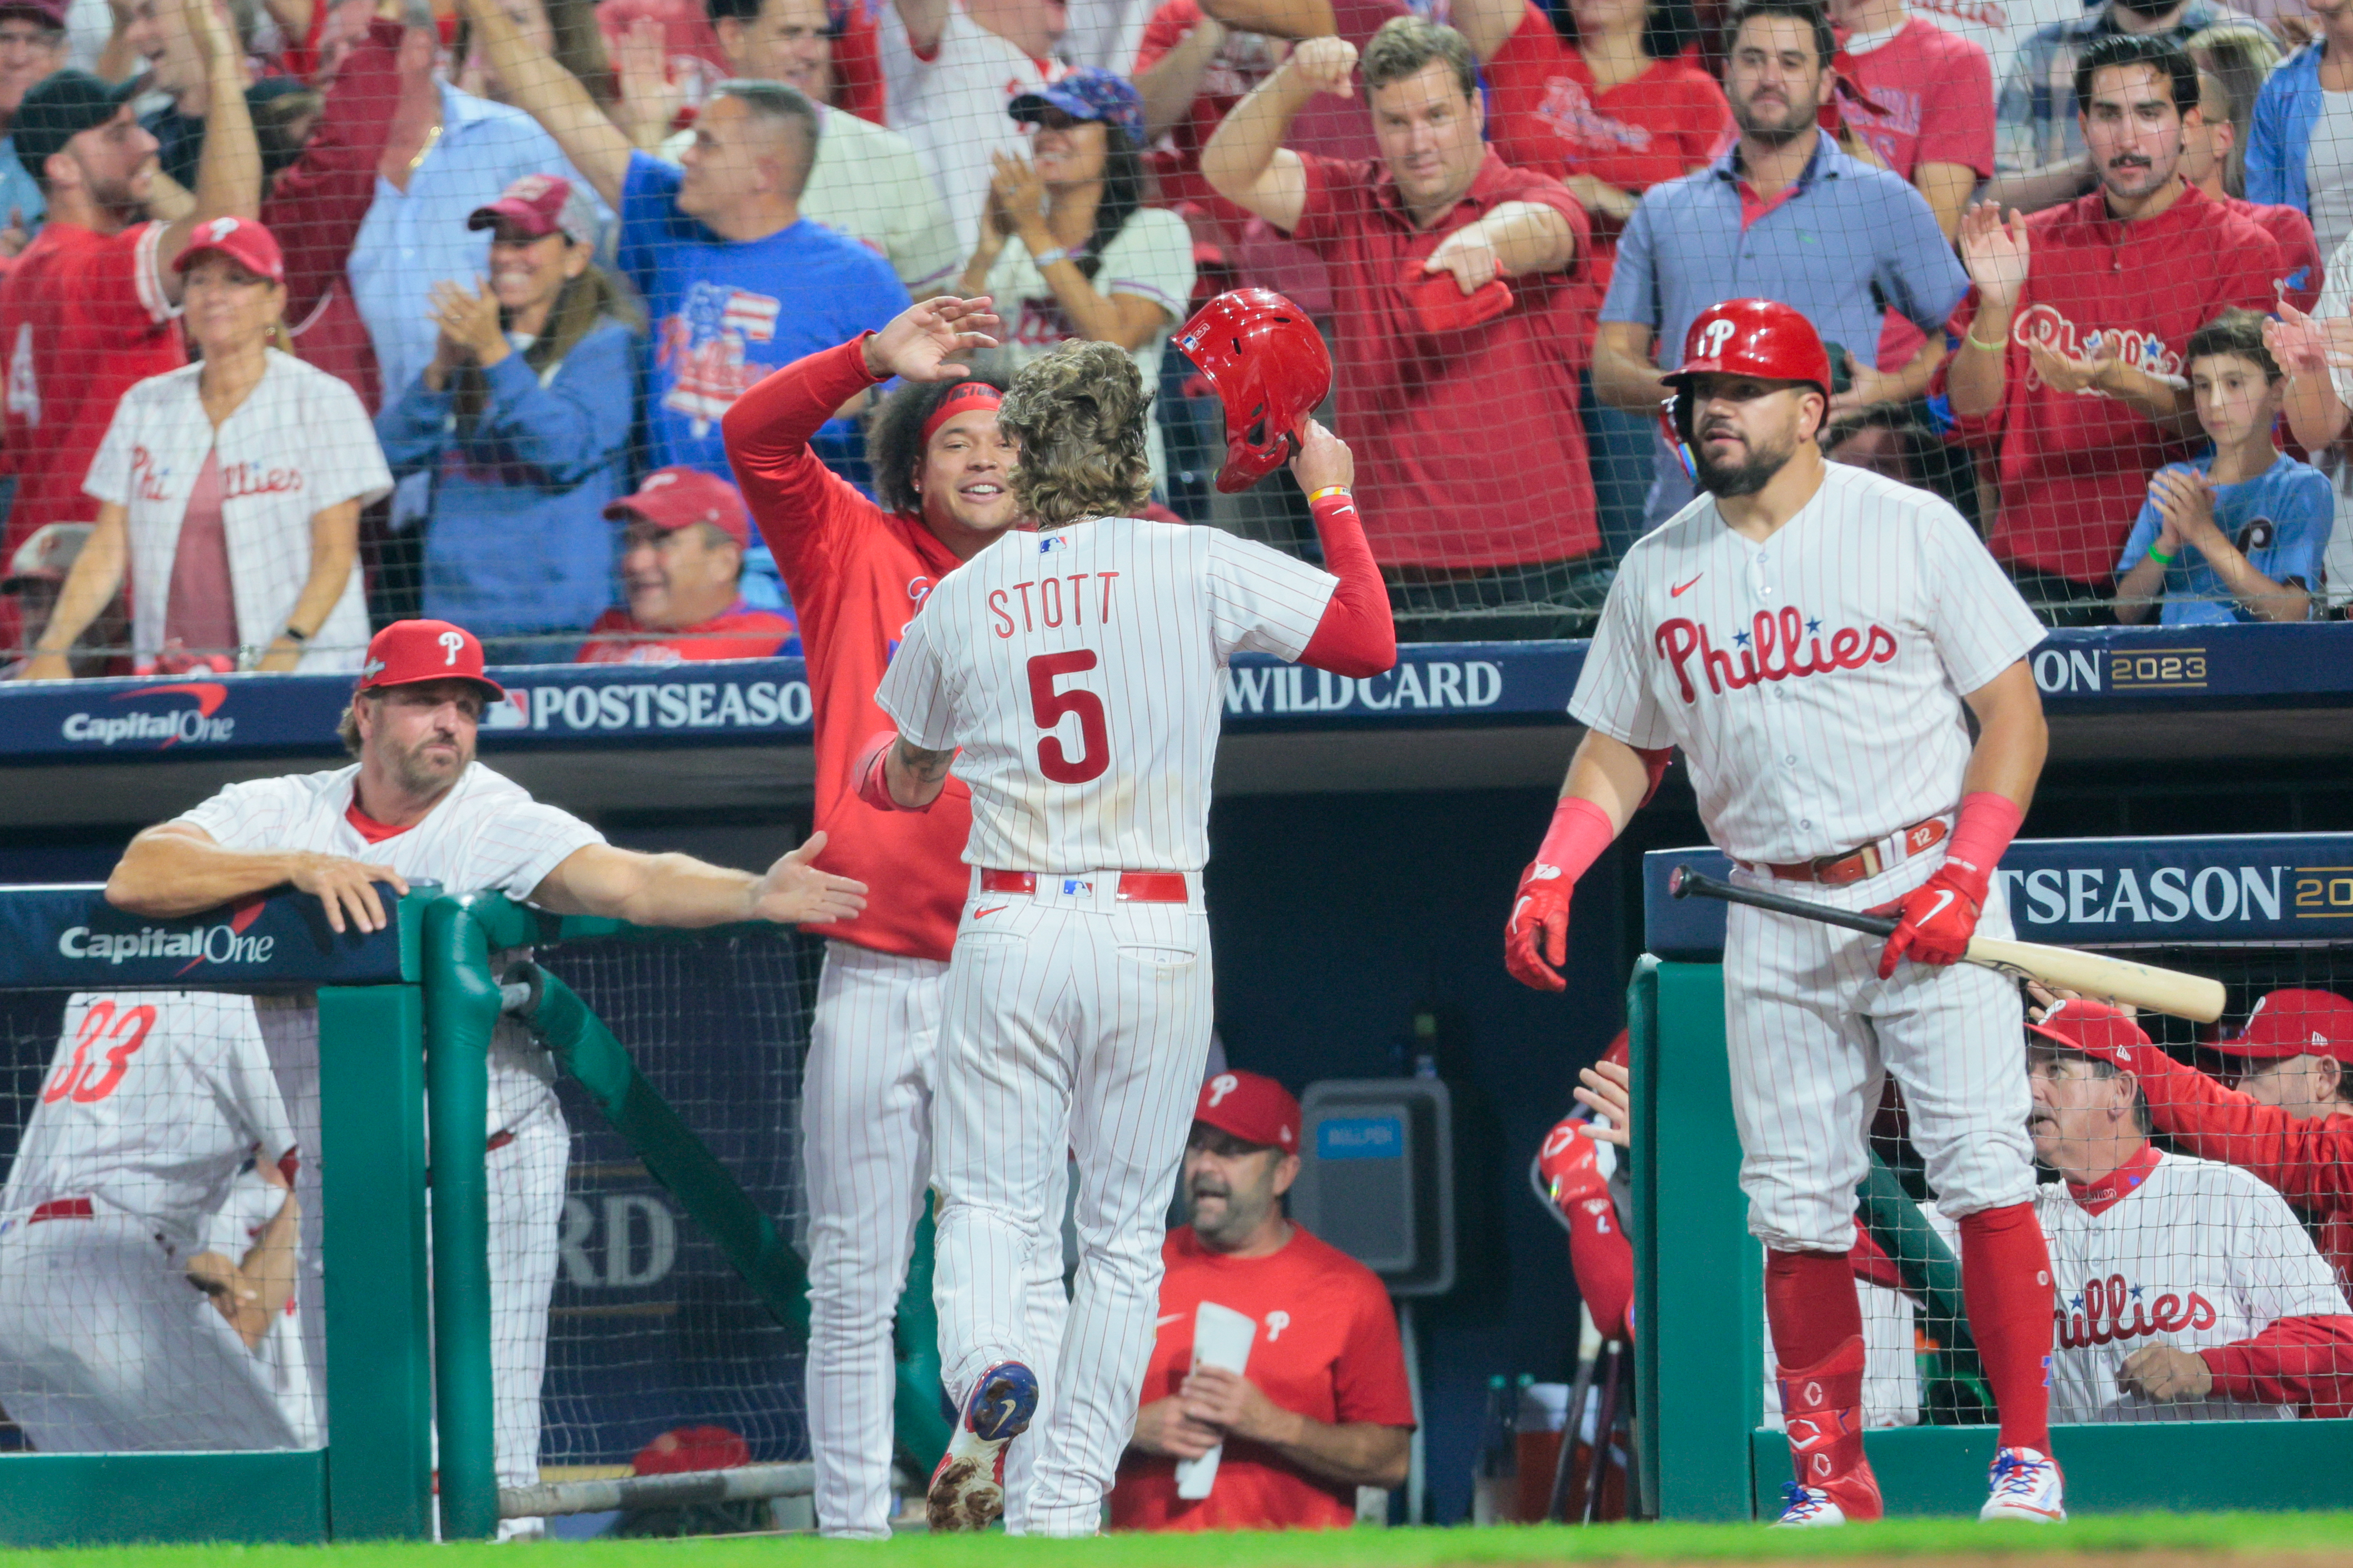 RedOctober: After 11-year playoff drought, Phillies fans descend